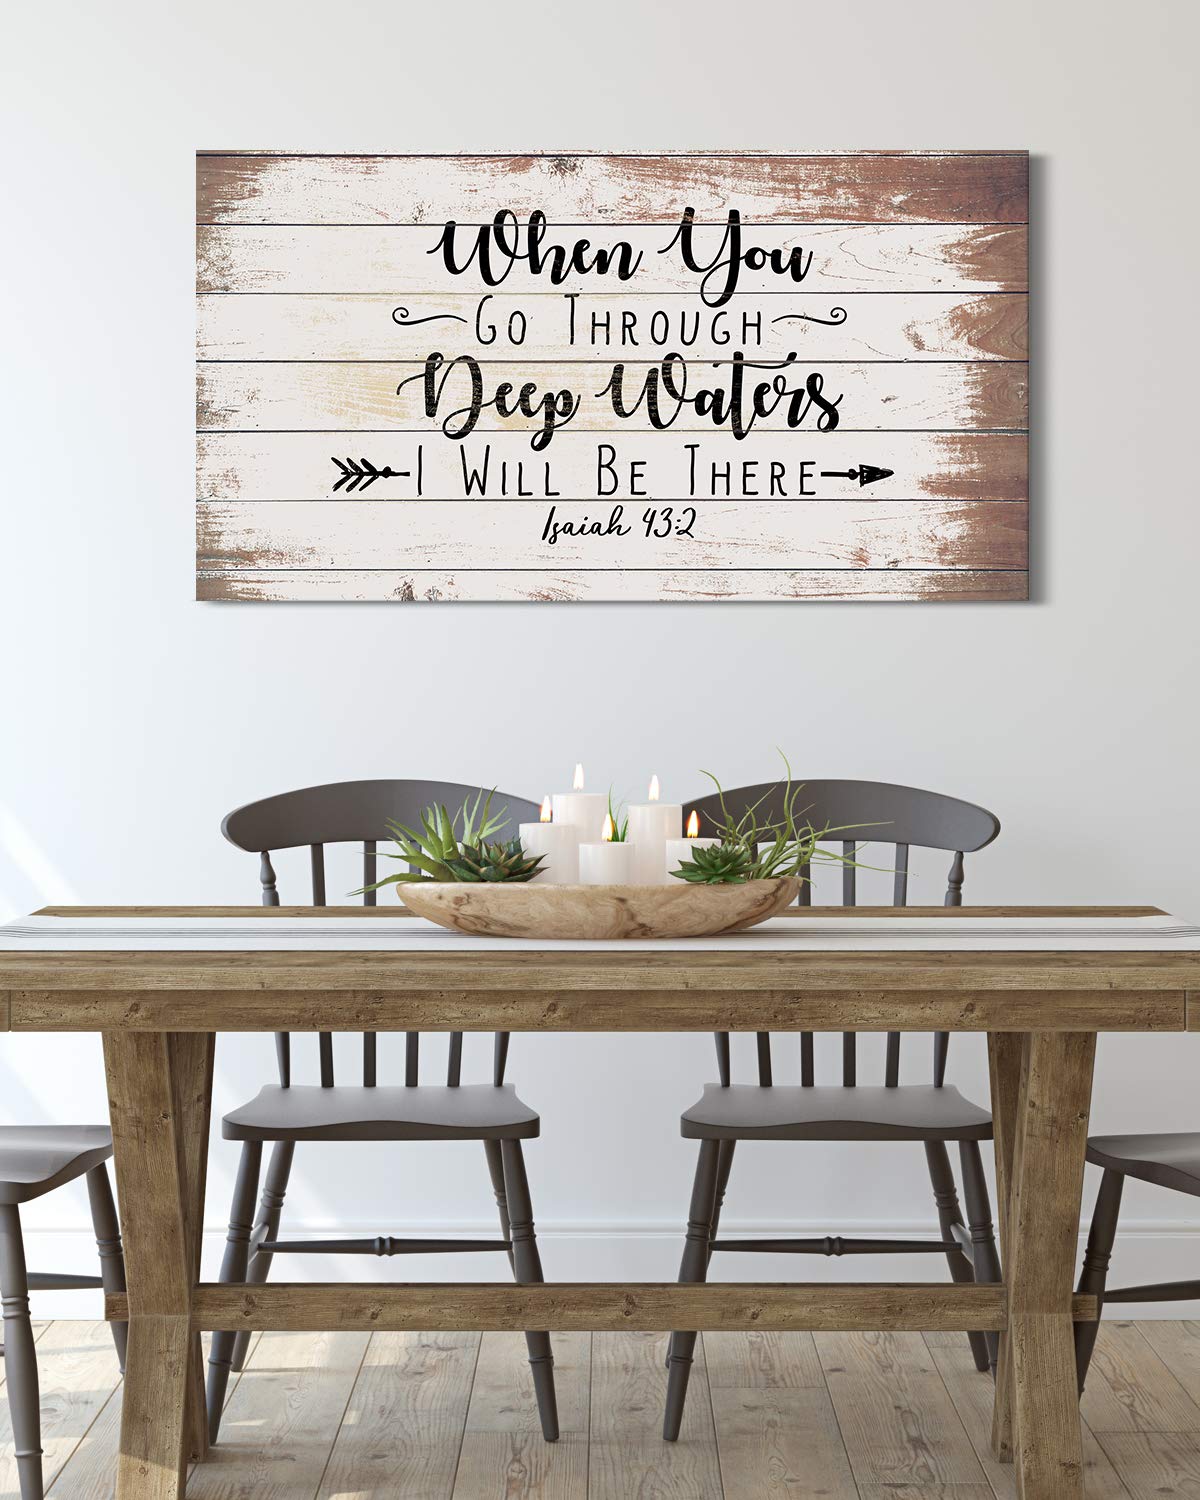 When You Go Through Deep Waters I Will Be There Isaiah 43:2 - Religious Wall Decor Art Canvas on Printed Woodgrain Background - Ready to Hang - Great for above a couch, table, bed or more